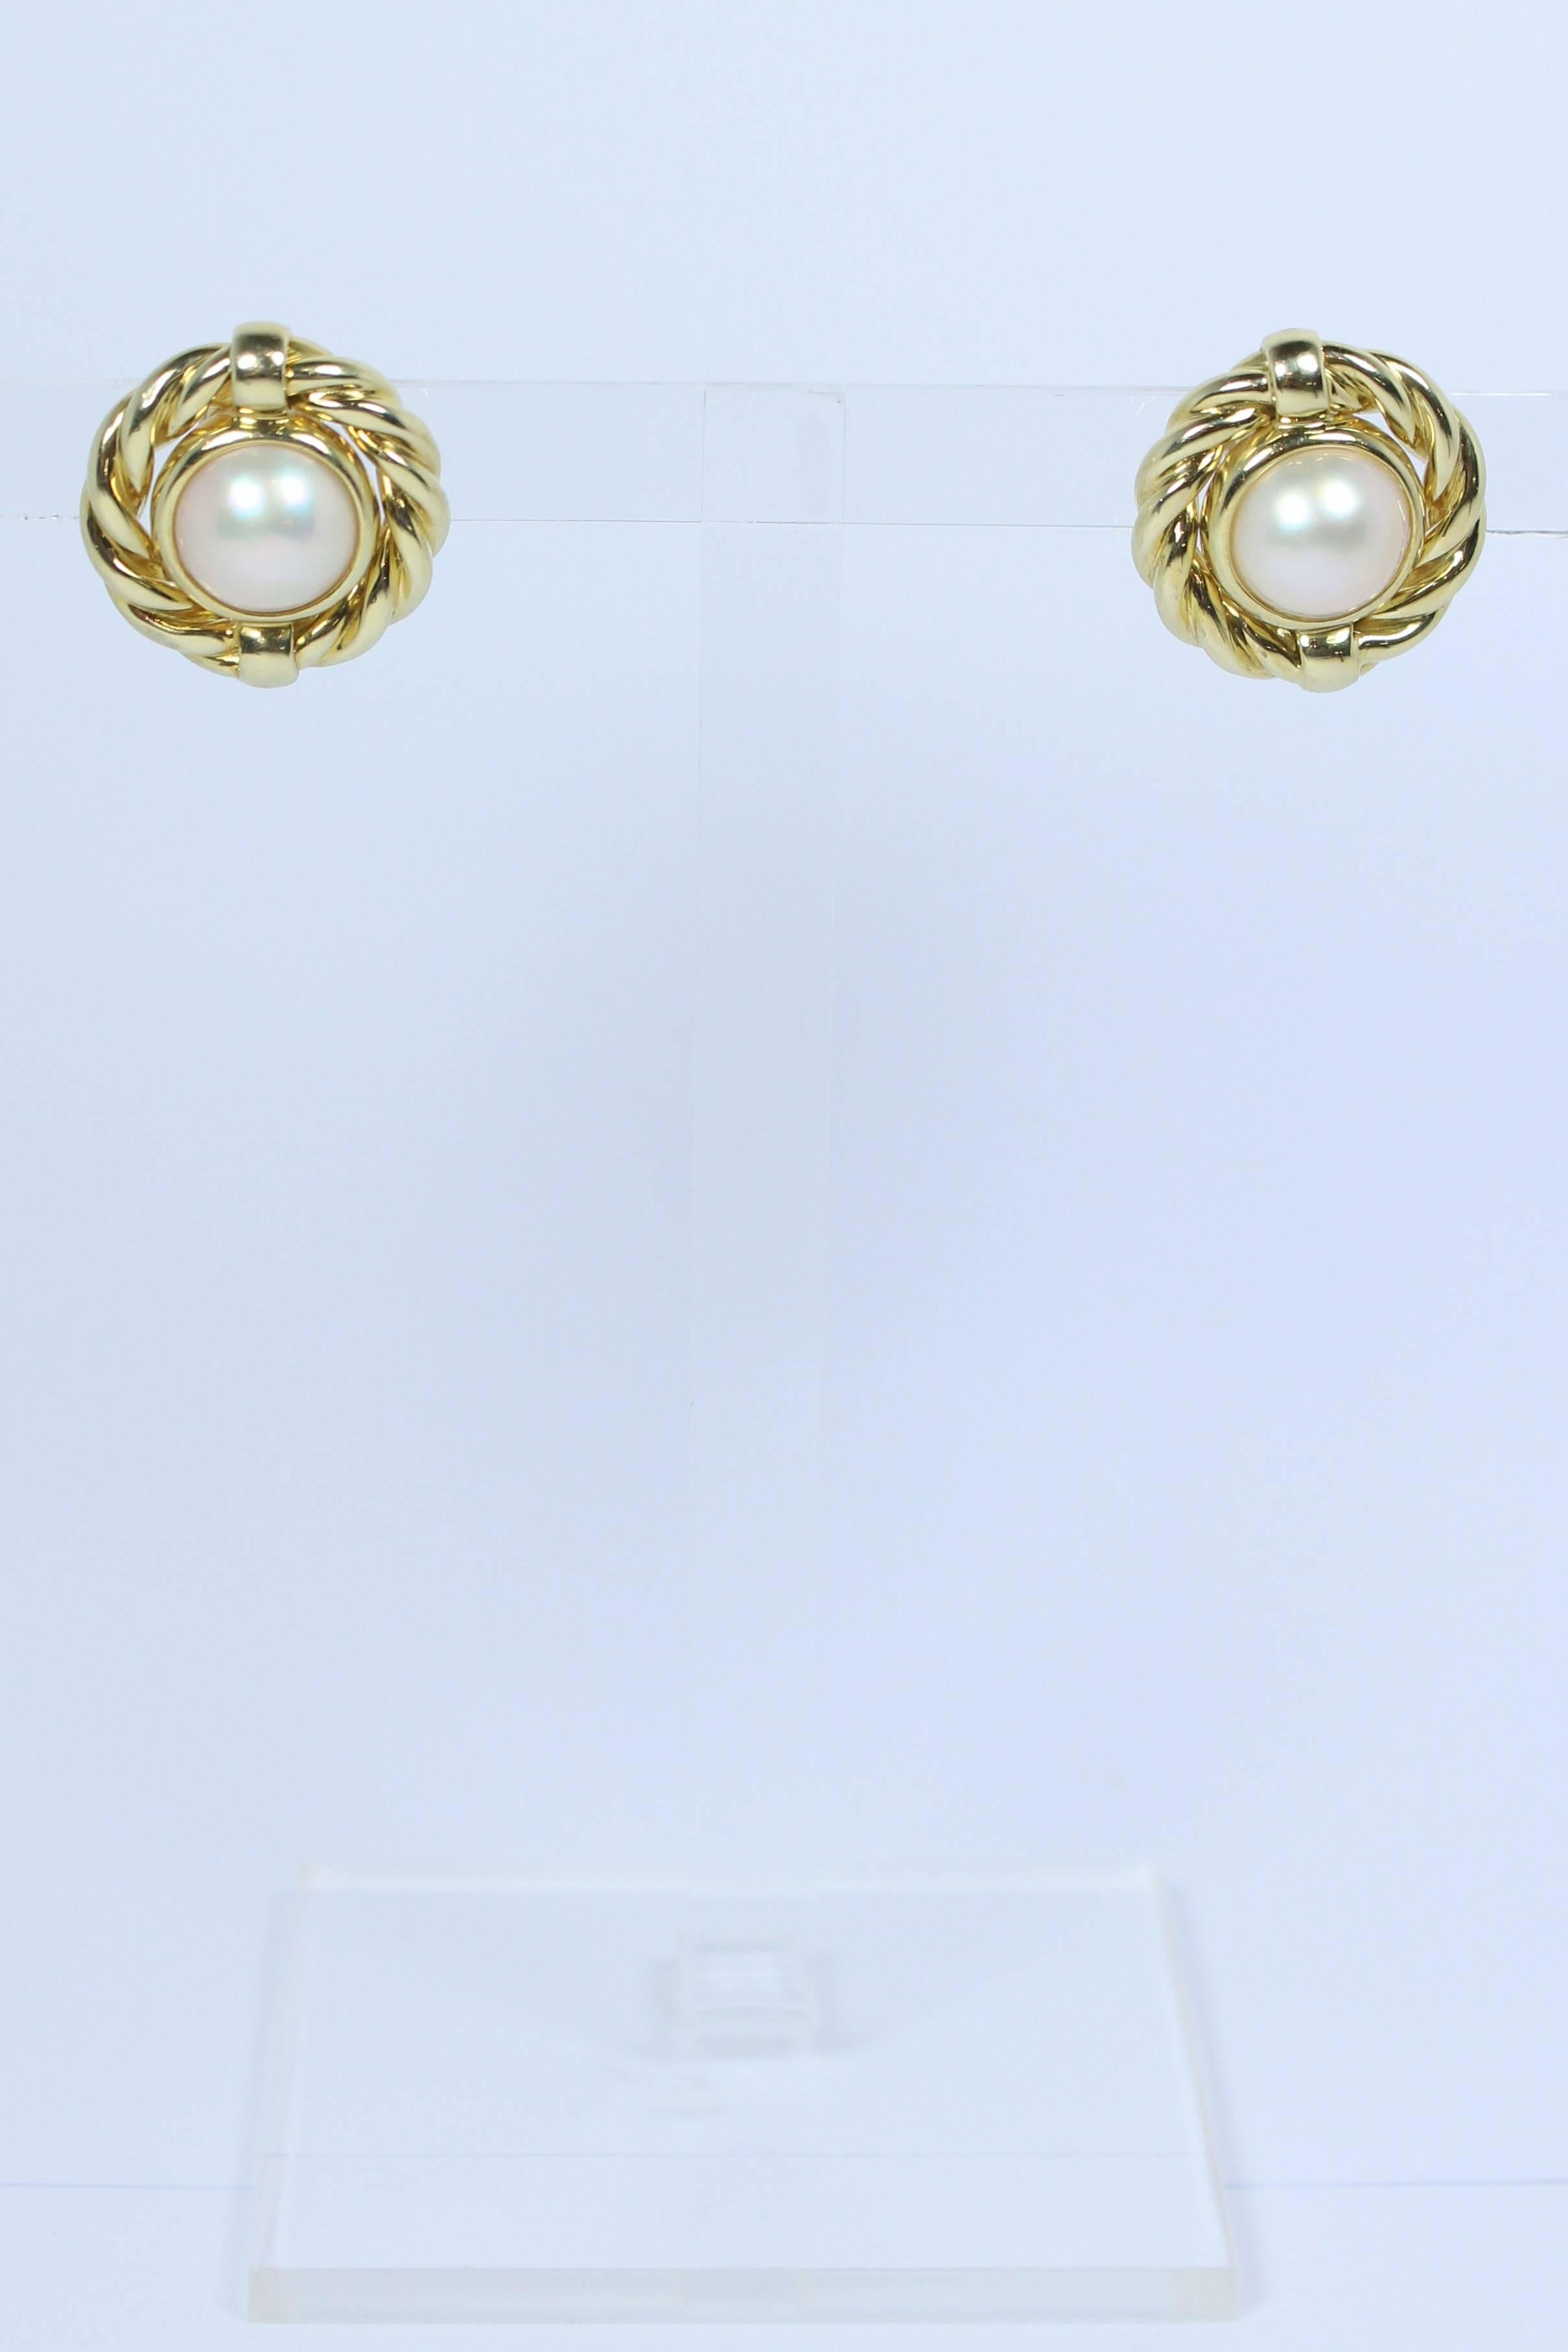 Mabe Pearl Gold Earrings  In Excellent Condition For Sale In Los Angeles, CA